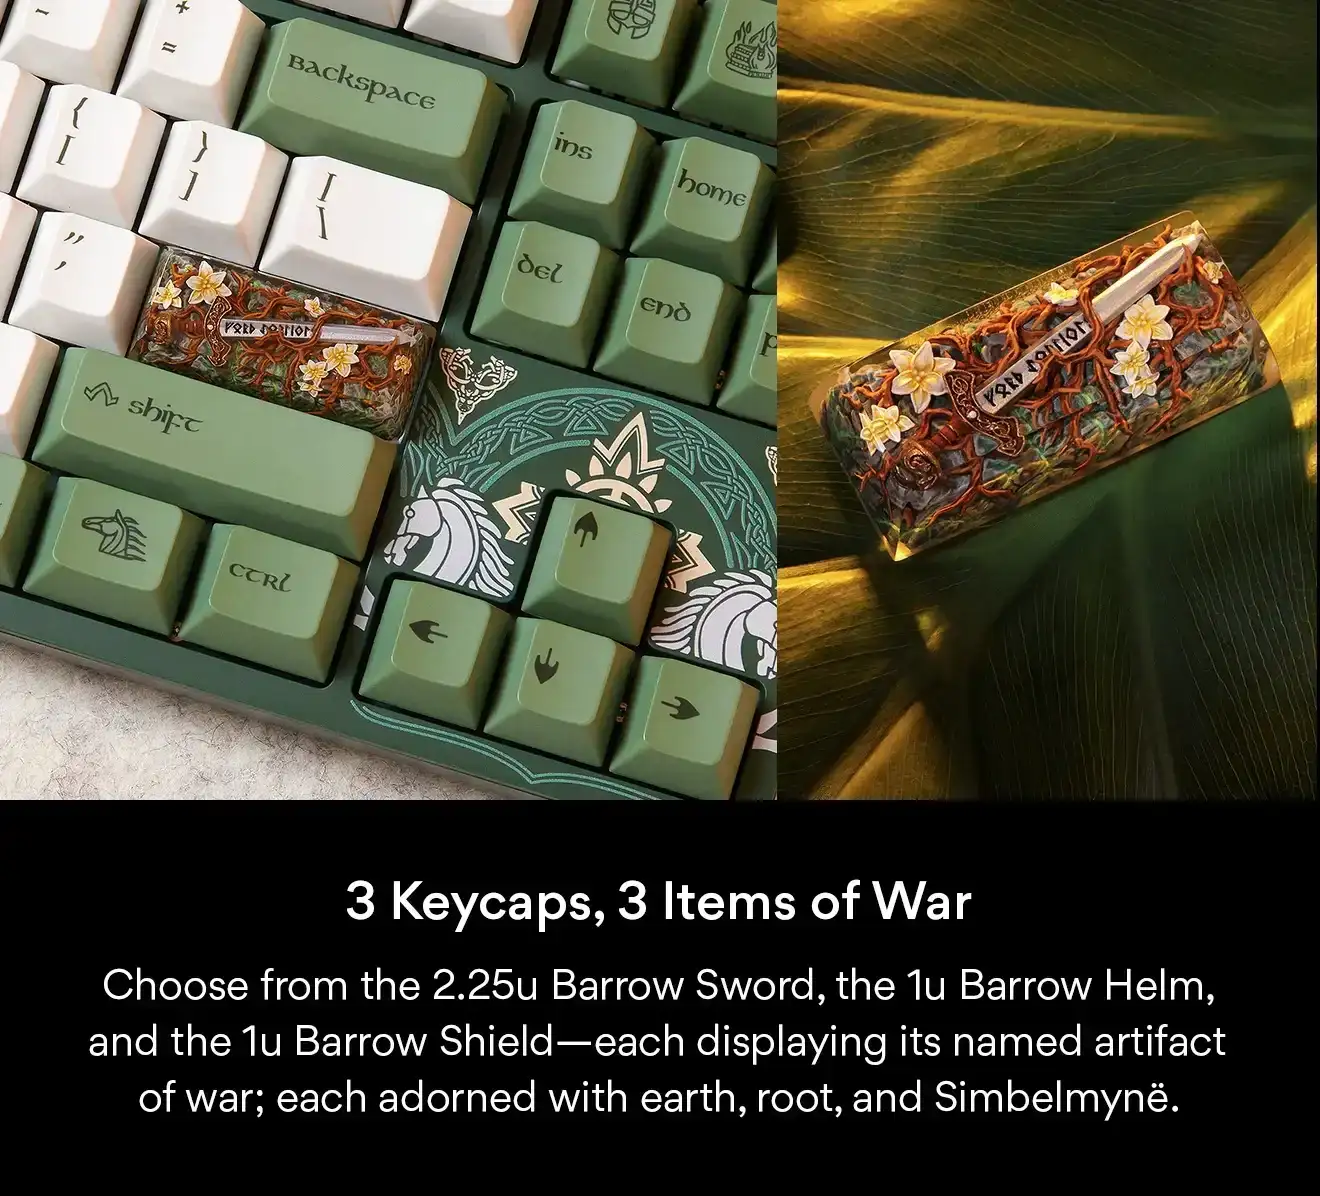 3 Keycaps, 3 Items of War